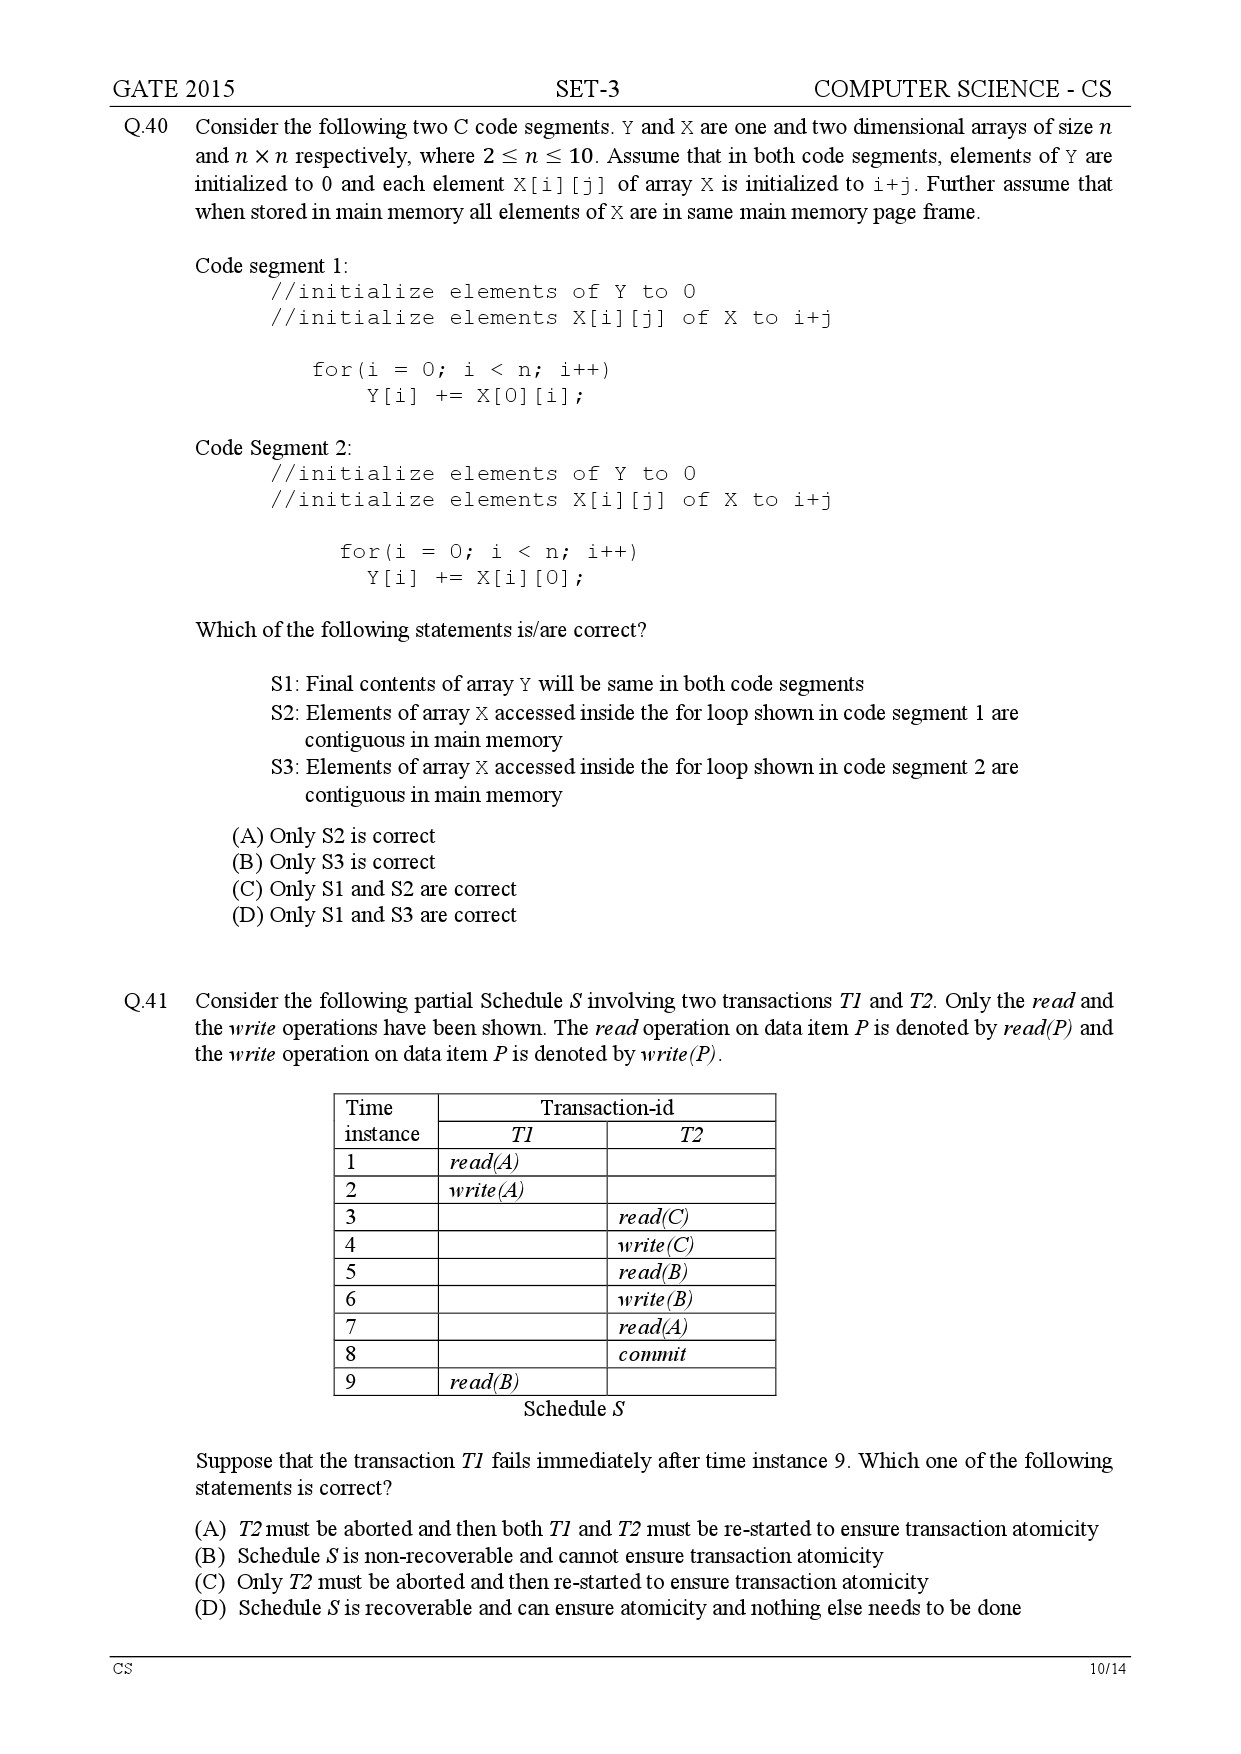 GATE Exam Question Paper 2015 Computer Science and Information Technology Set 3 10